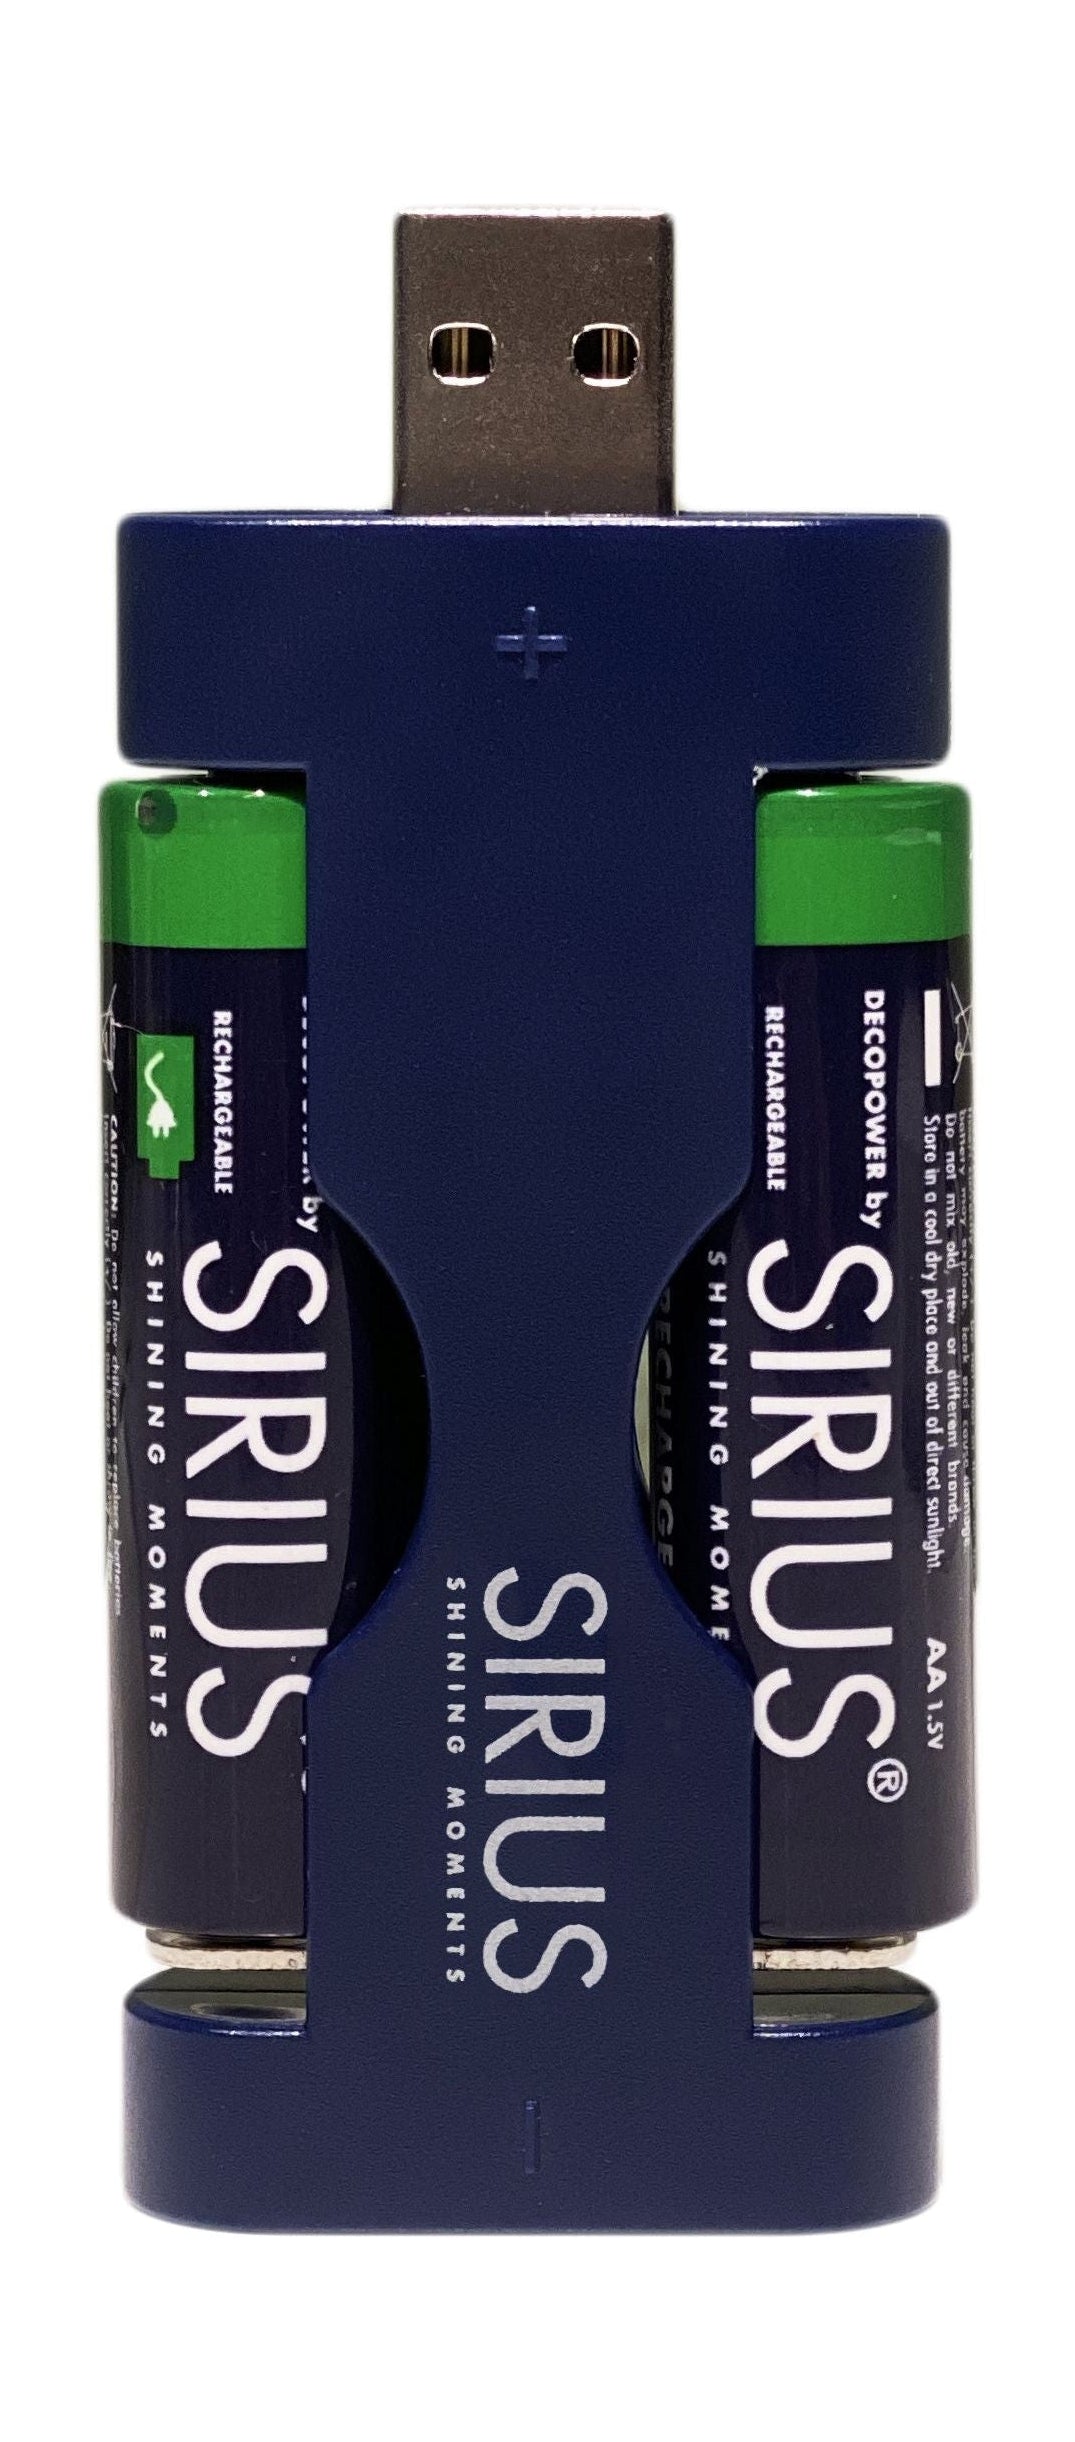 Sirius Deco Power Usb Charger Incl. 4x Aa Rechargeable Batteries